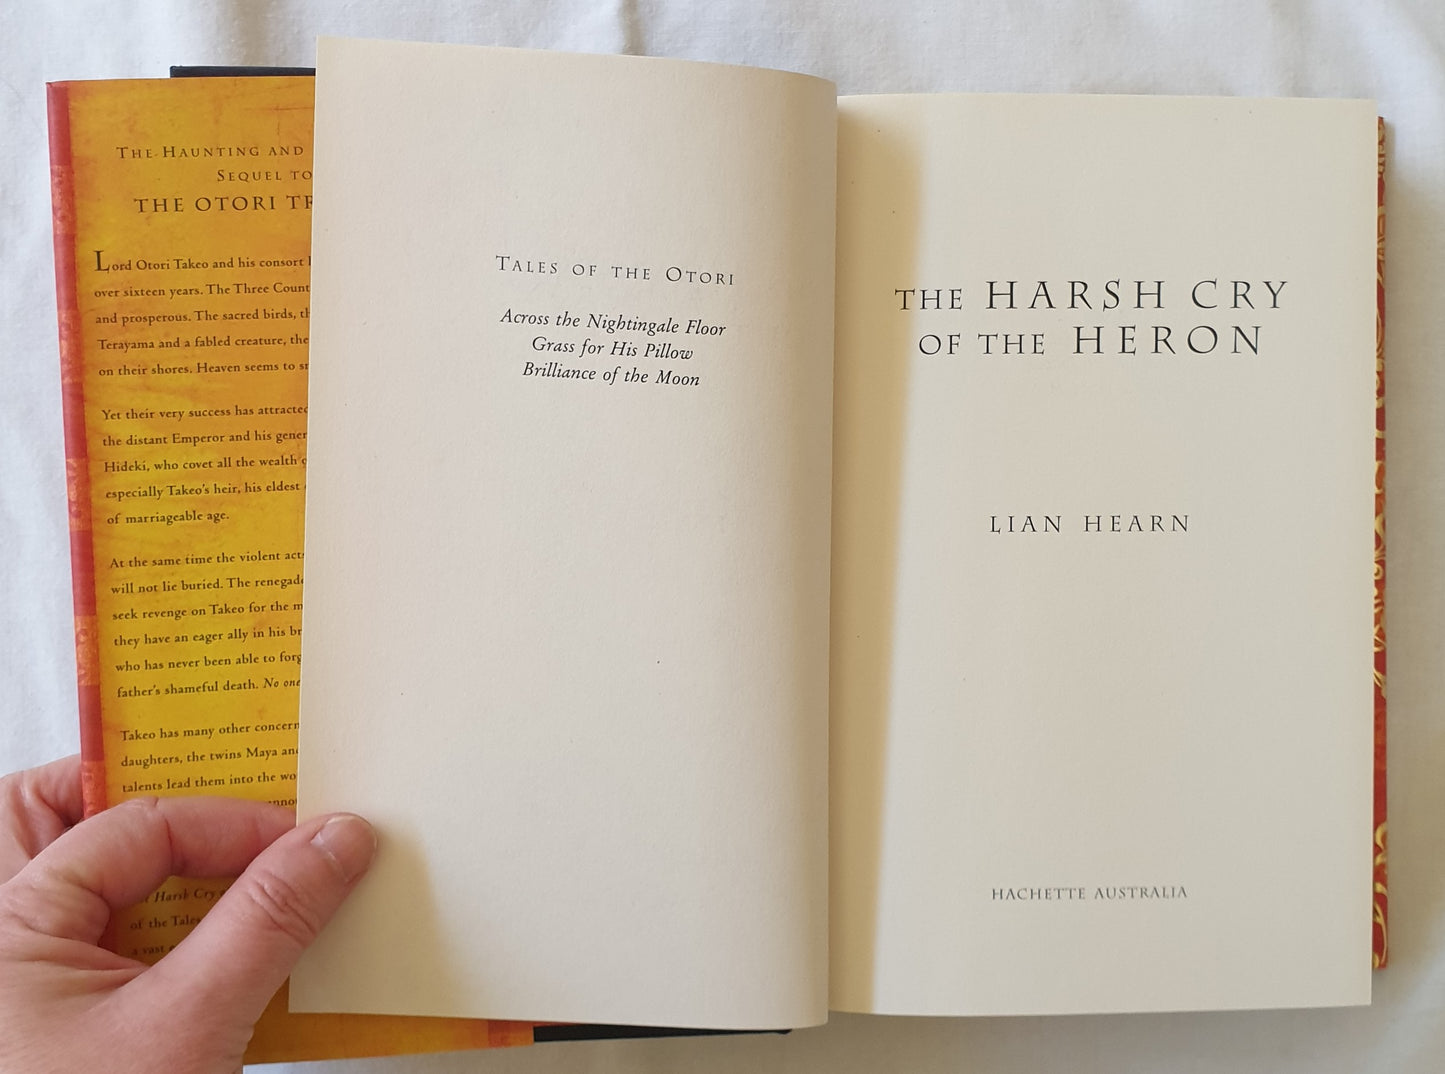 The Harsh Cry of the Heron Tales of the Otori by Lian Hearn